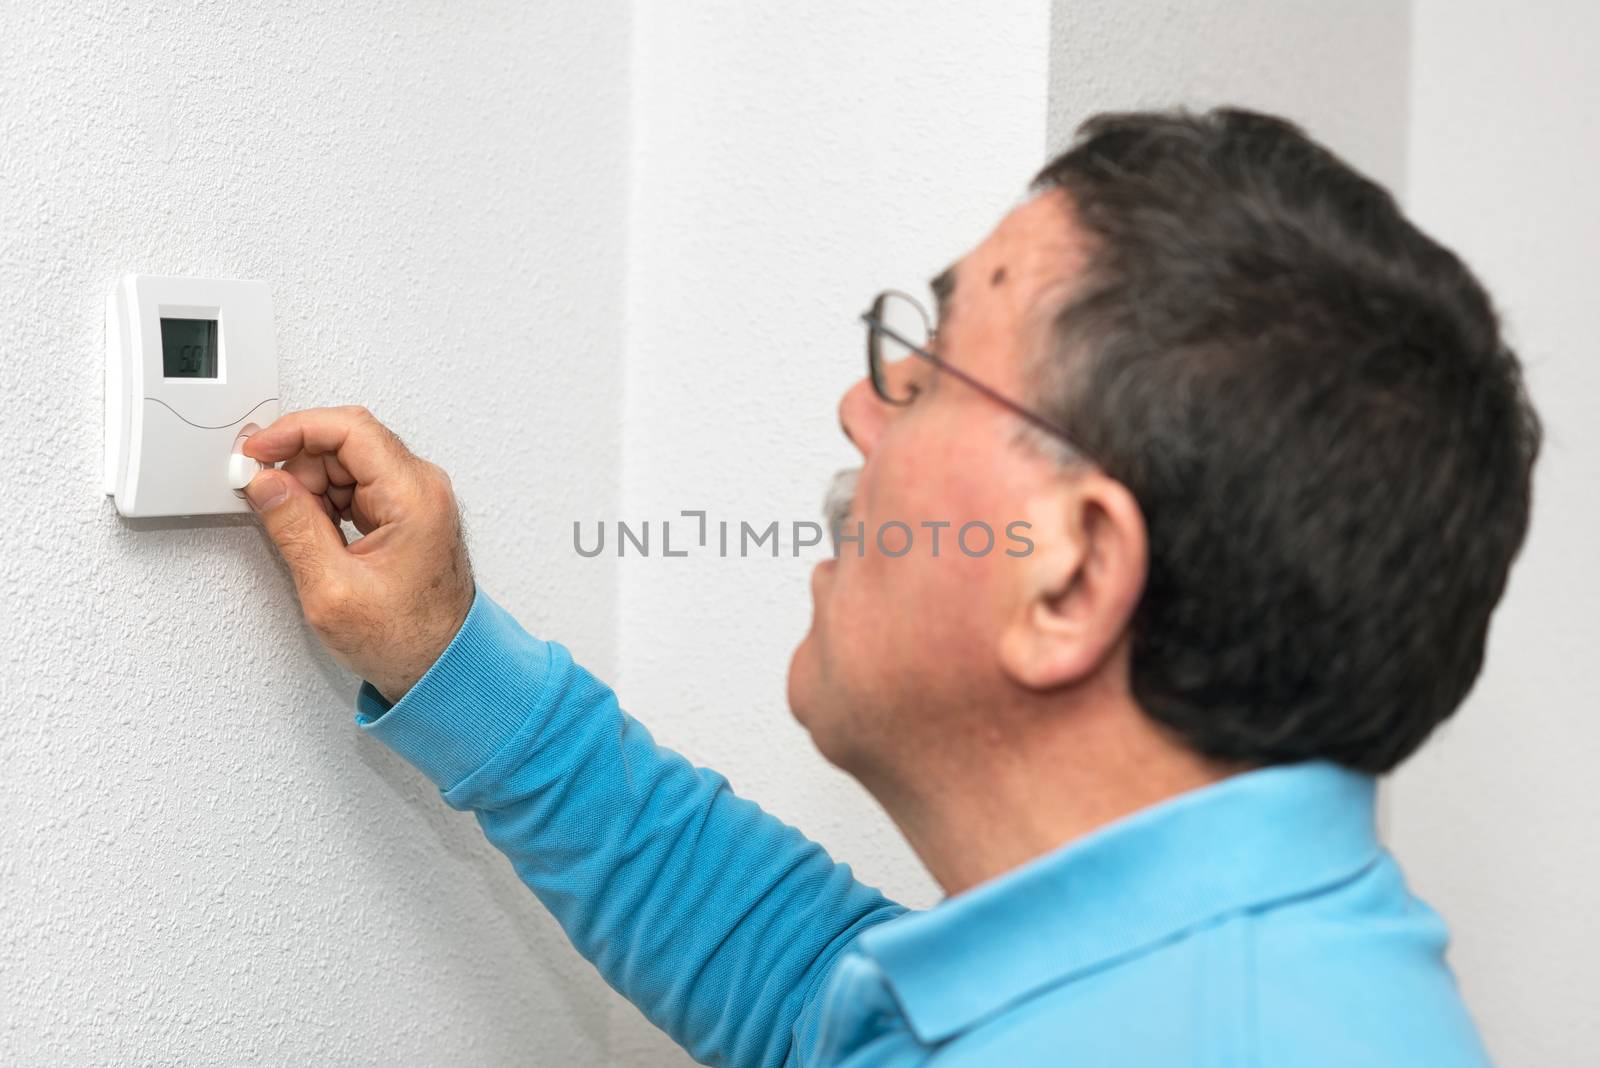 Man adjusting thermostat at home, focus on thermostat. Celsius temperature scale.